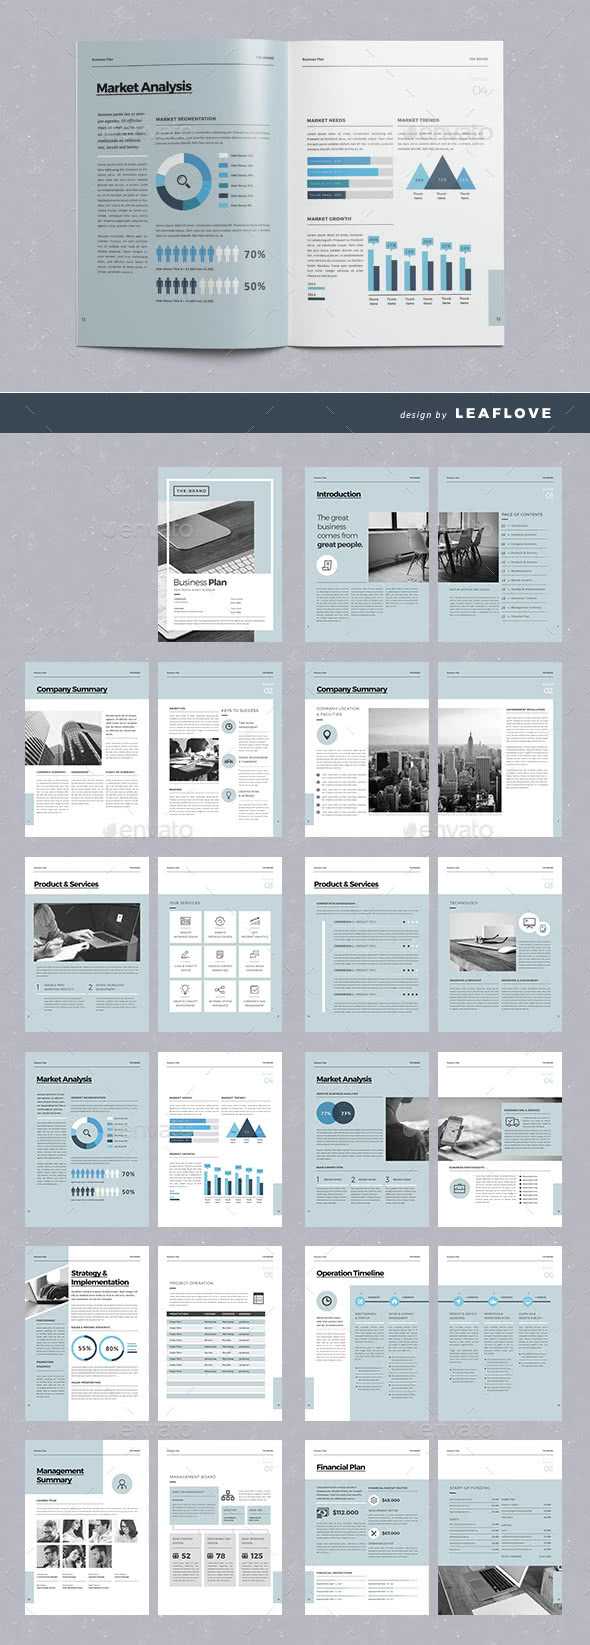 75 Fresh Indesign Templates And Where To Find More With Regard To Free Indesign Report Templates